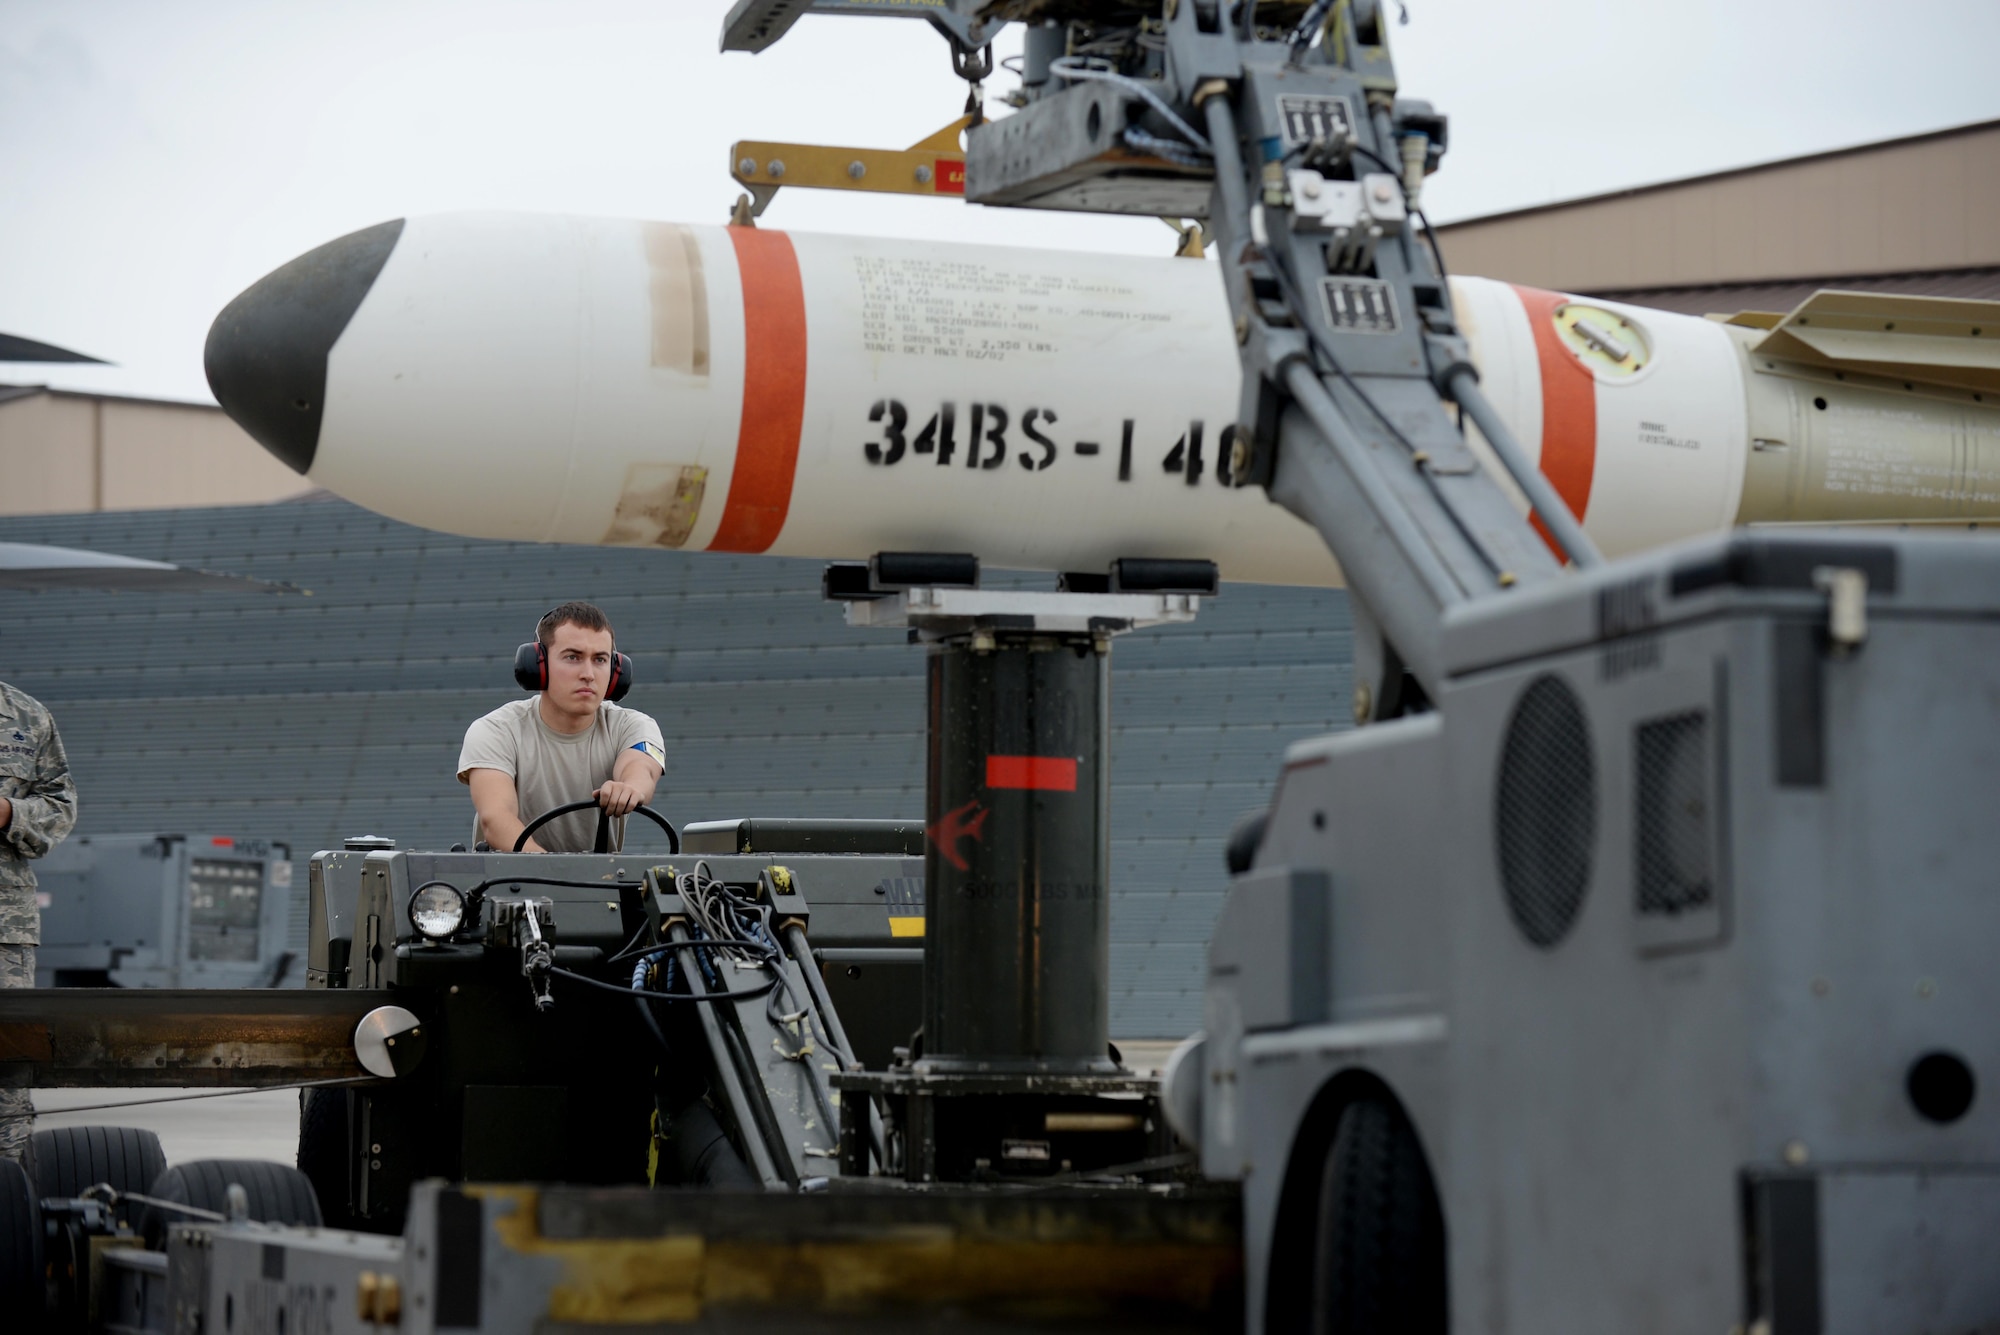 Airman 1st Class Trenton Anderson, 28th Munitions Squadron load crew member, transfers an Mk-65 Quick Strike mine onto a jammer prior to loading into a B-1 bomber during a joint mission exercise at Ellsworth Air Force Base, S.D., June 3, 2014. The B-1 and B-52 Stratofortress are the only aircraft capable of delivering the Mk-65 and 62 payloads. (U.S. Air Force photo by Airman 1st Class Rebecca Imwalle/Released)